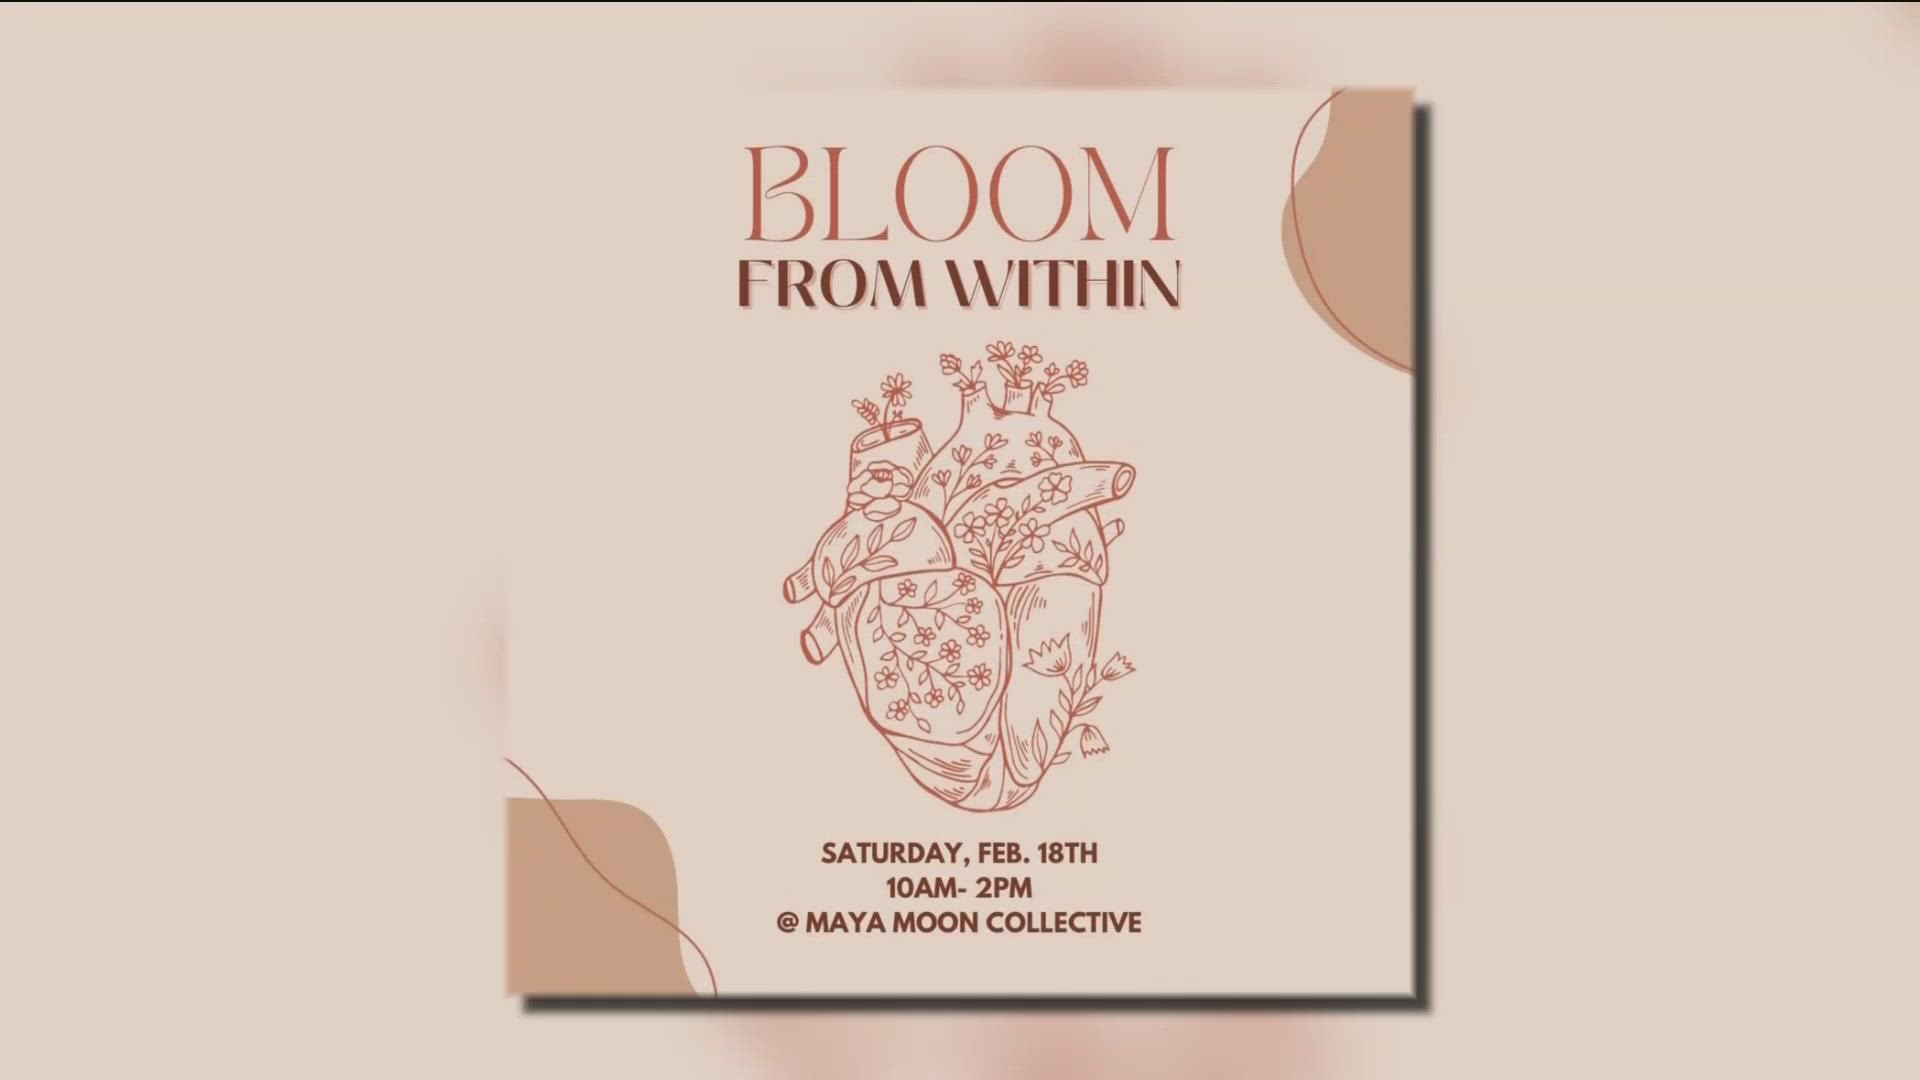 The "Bloom from Within" wellness event will be on Saturday February 18th and is hosted by three local Latina-owned brands to promote self-love.